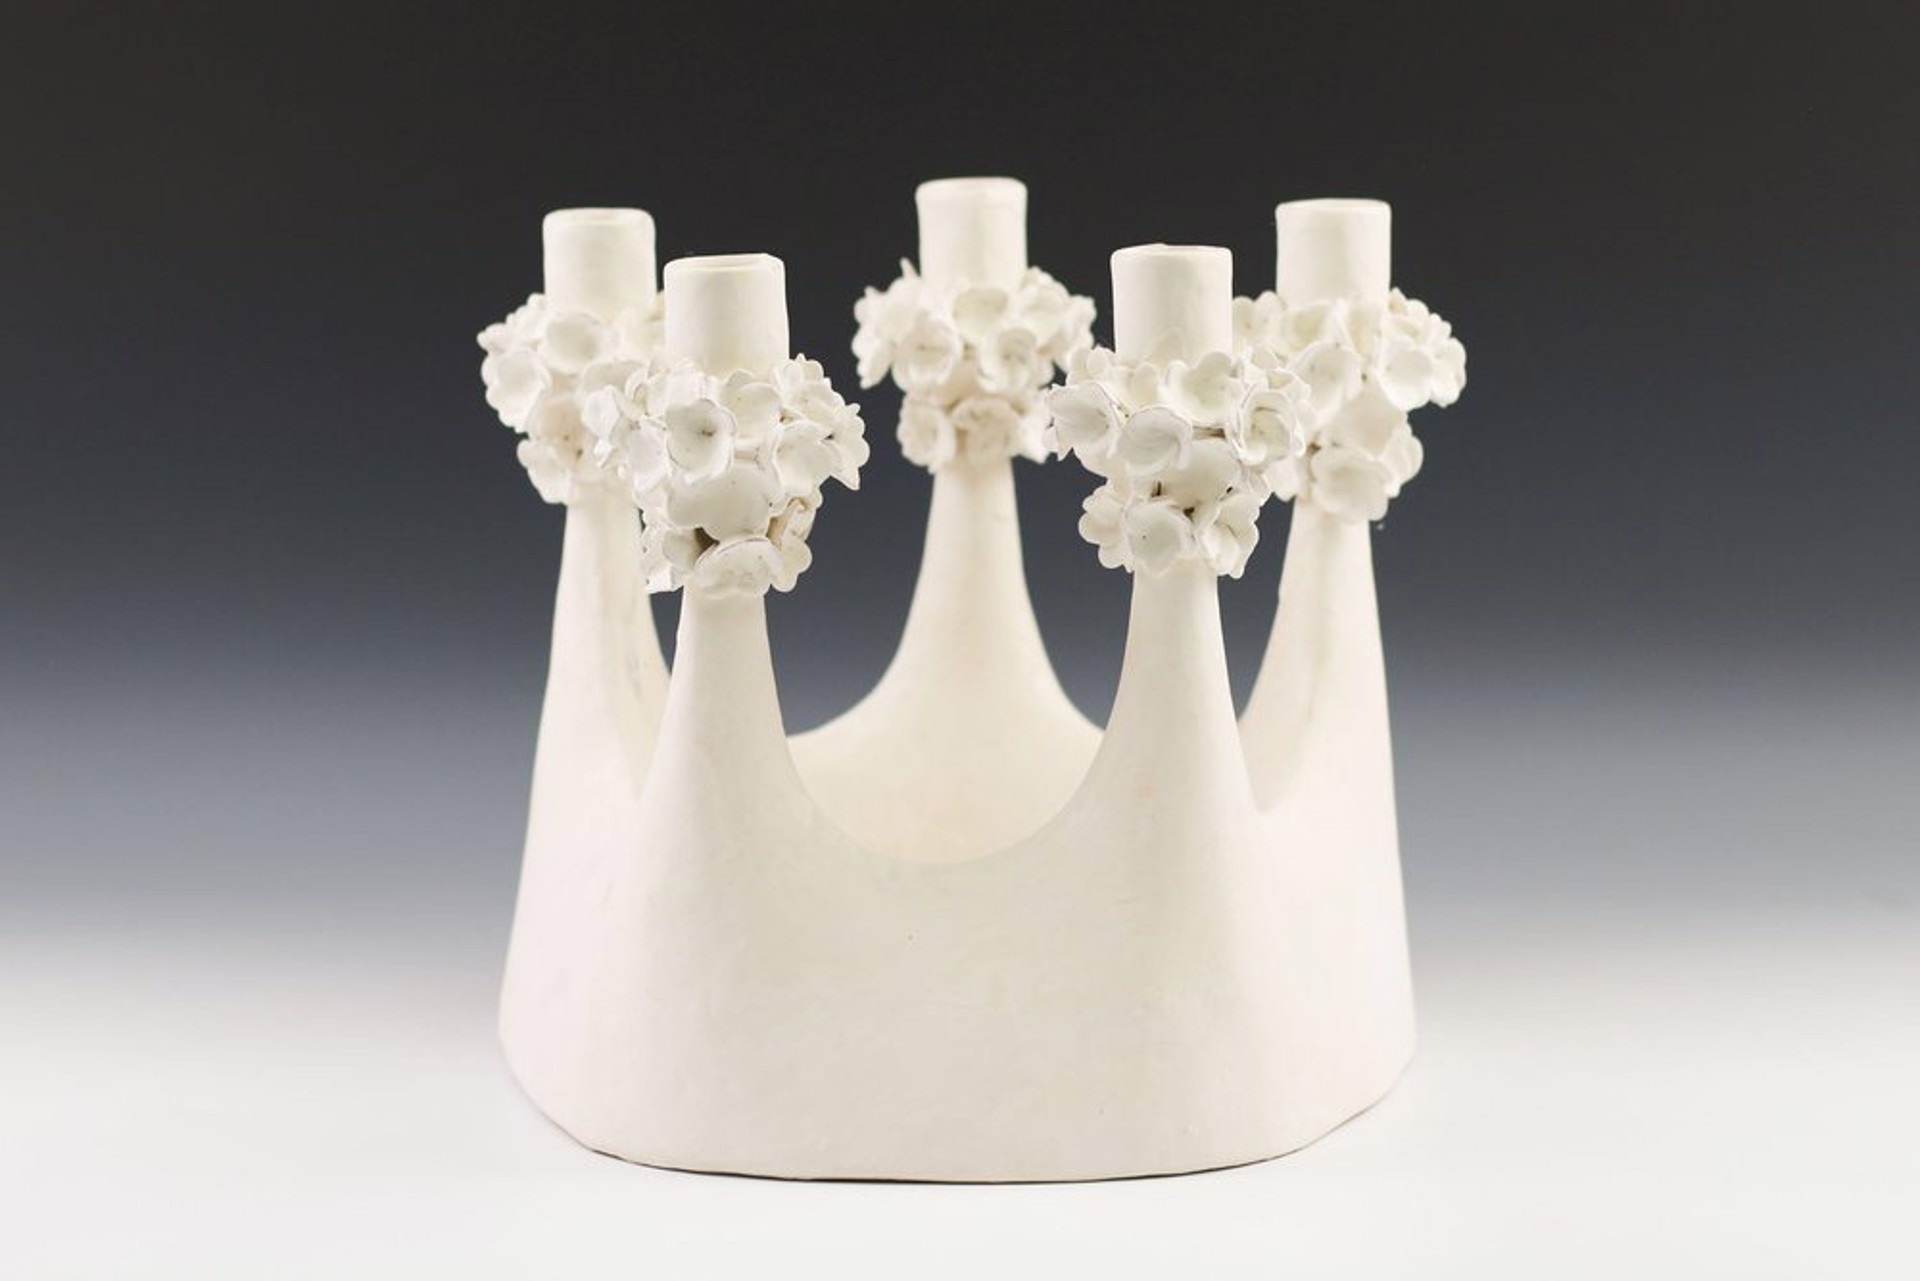 Candle Holder with Flowers - 5 Candles by Maggie Jaszczak